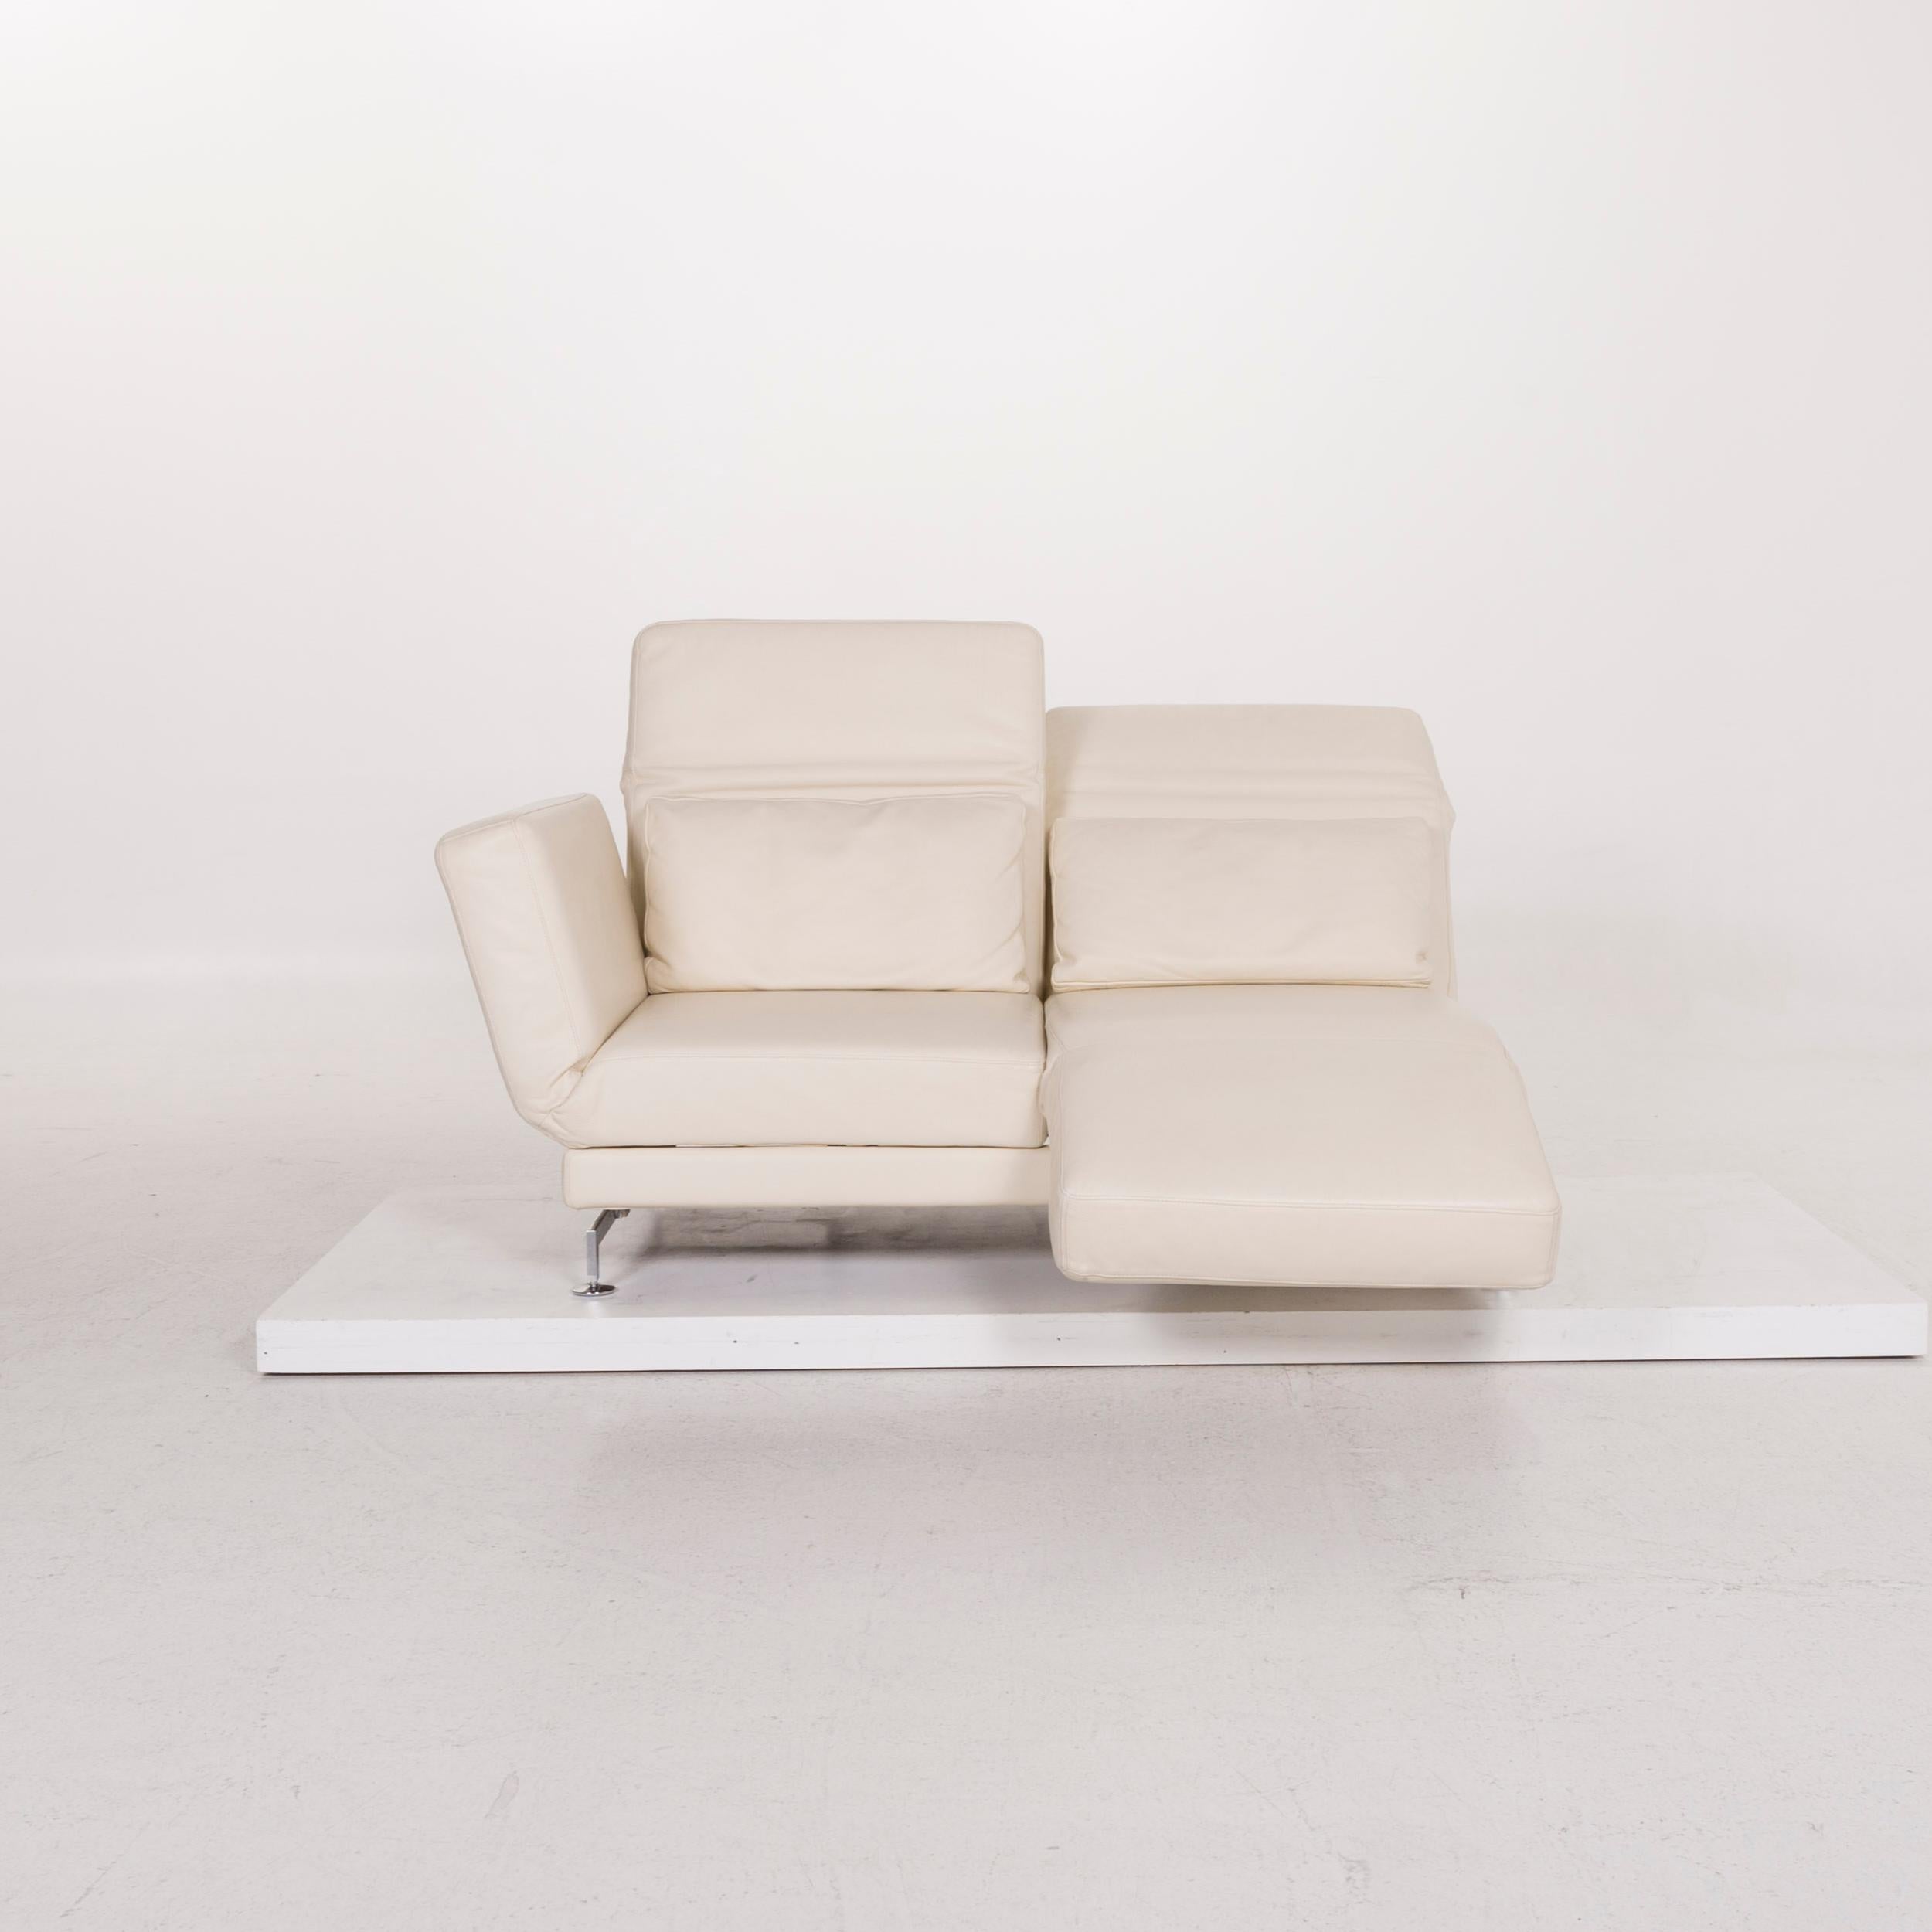 Contemporary Brühl & Sippold Moule Leather Sofa Cream Two-Seat For Sale